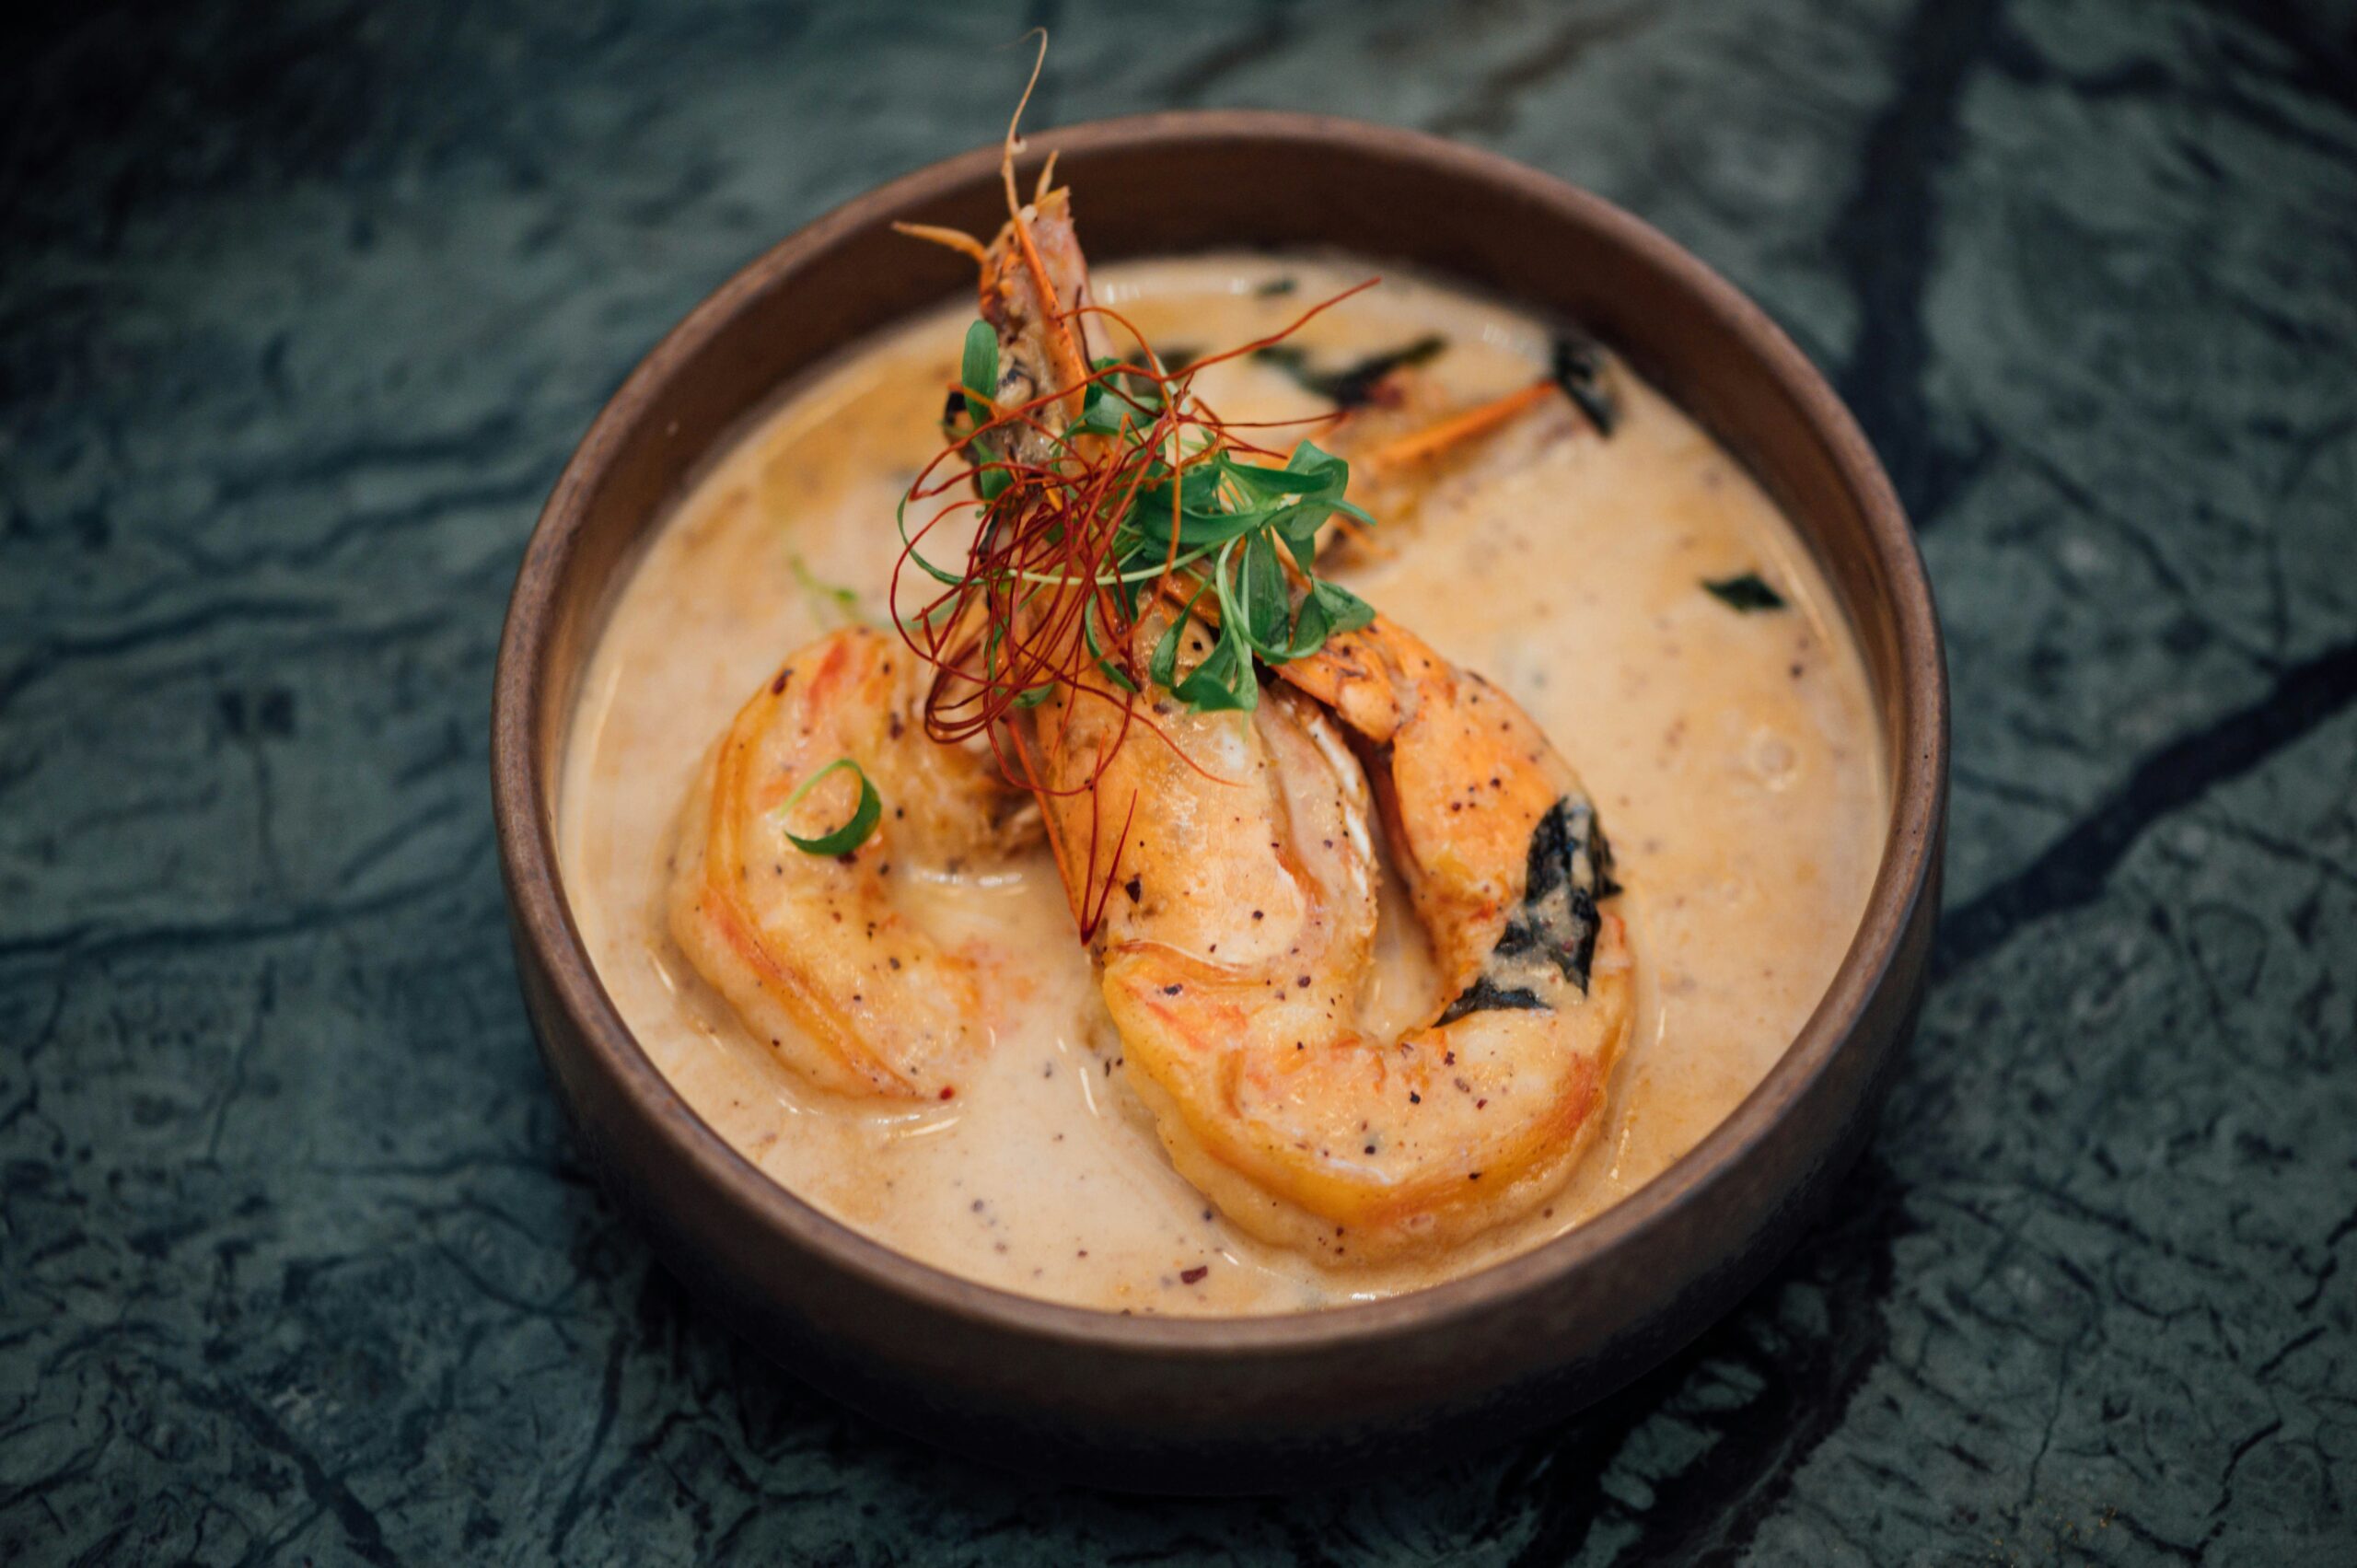 Shrimp and grits is a classic southern meal and an easy Sunday dinner idea. Pictured: Shrimp and grits